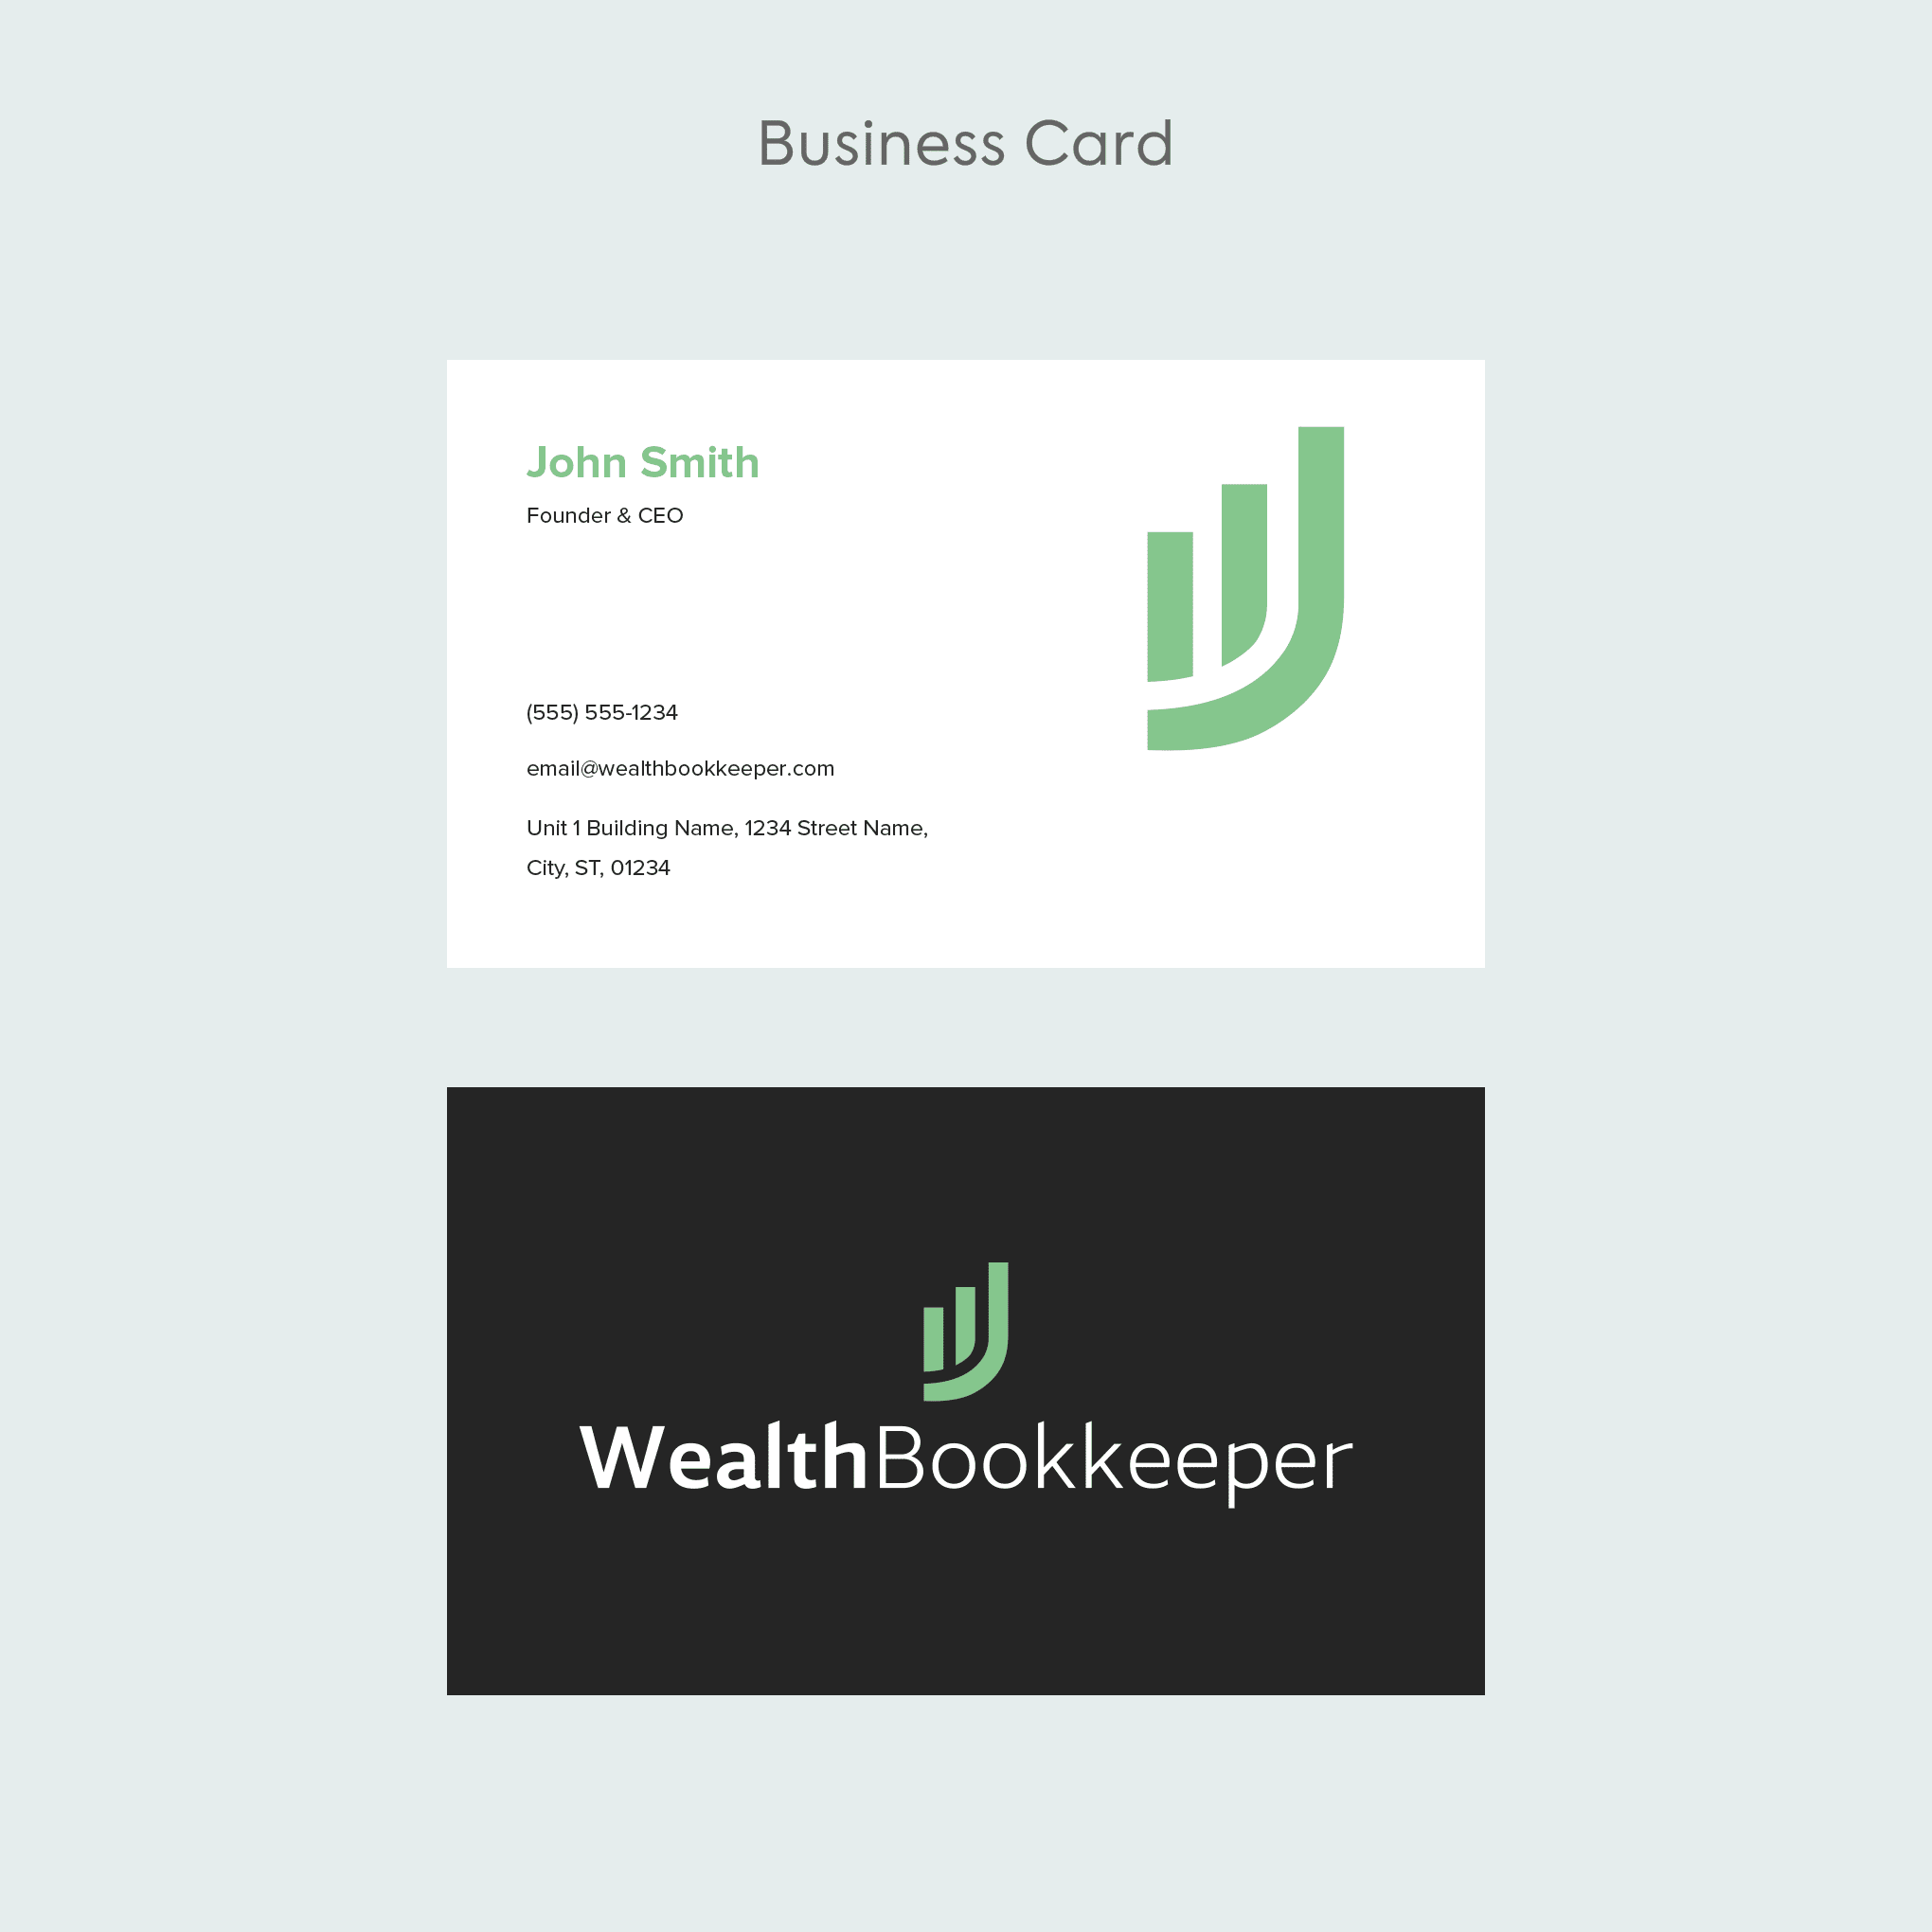 04 - Business Card Template (3)